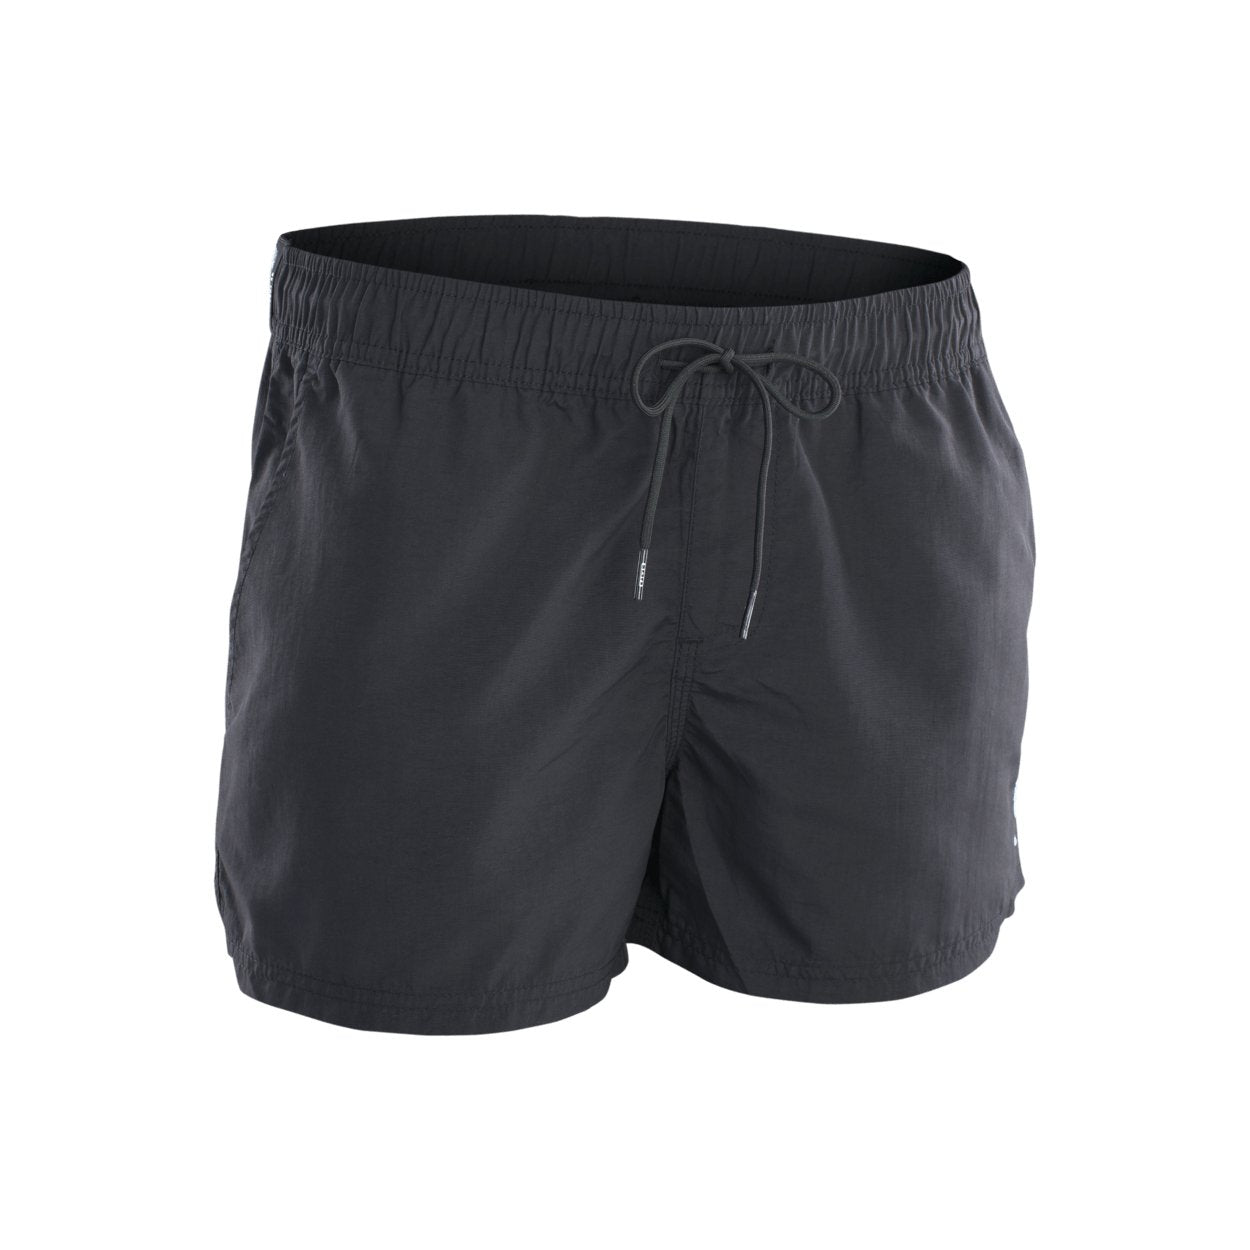 ION Shorts Volley 2.0 women 2023 - Worthing Watersports - dummy - Apparel - ION Bike